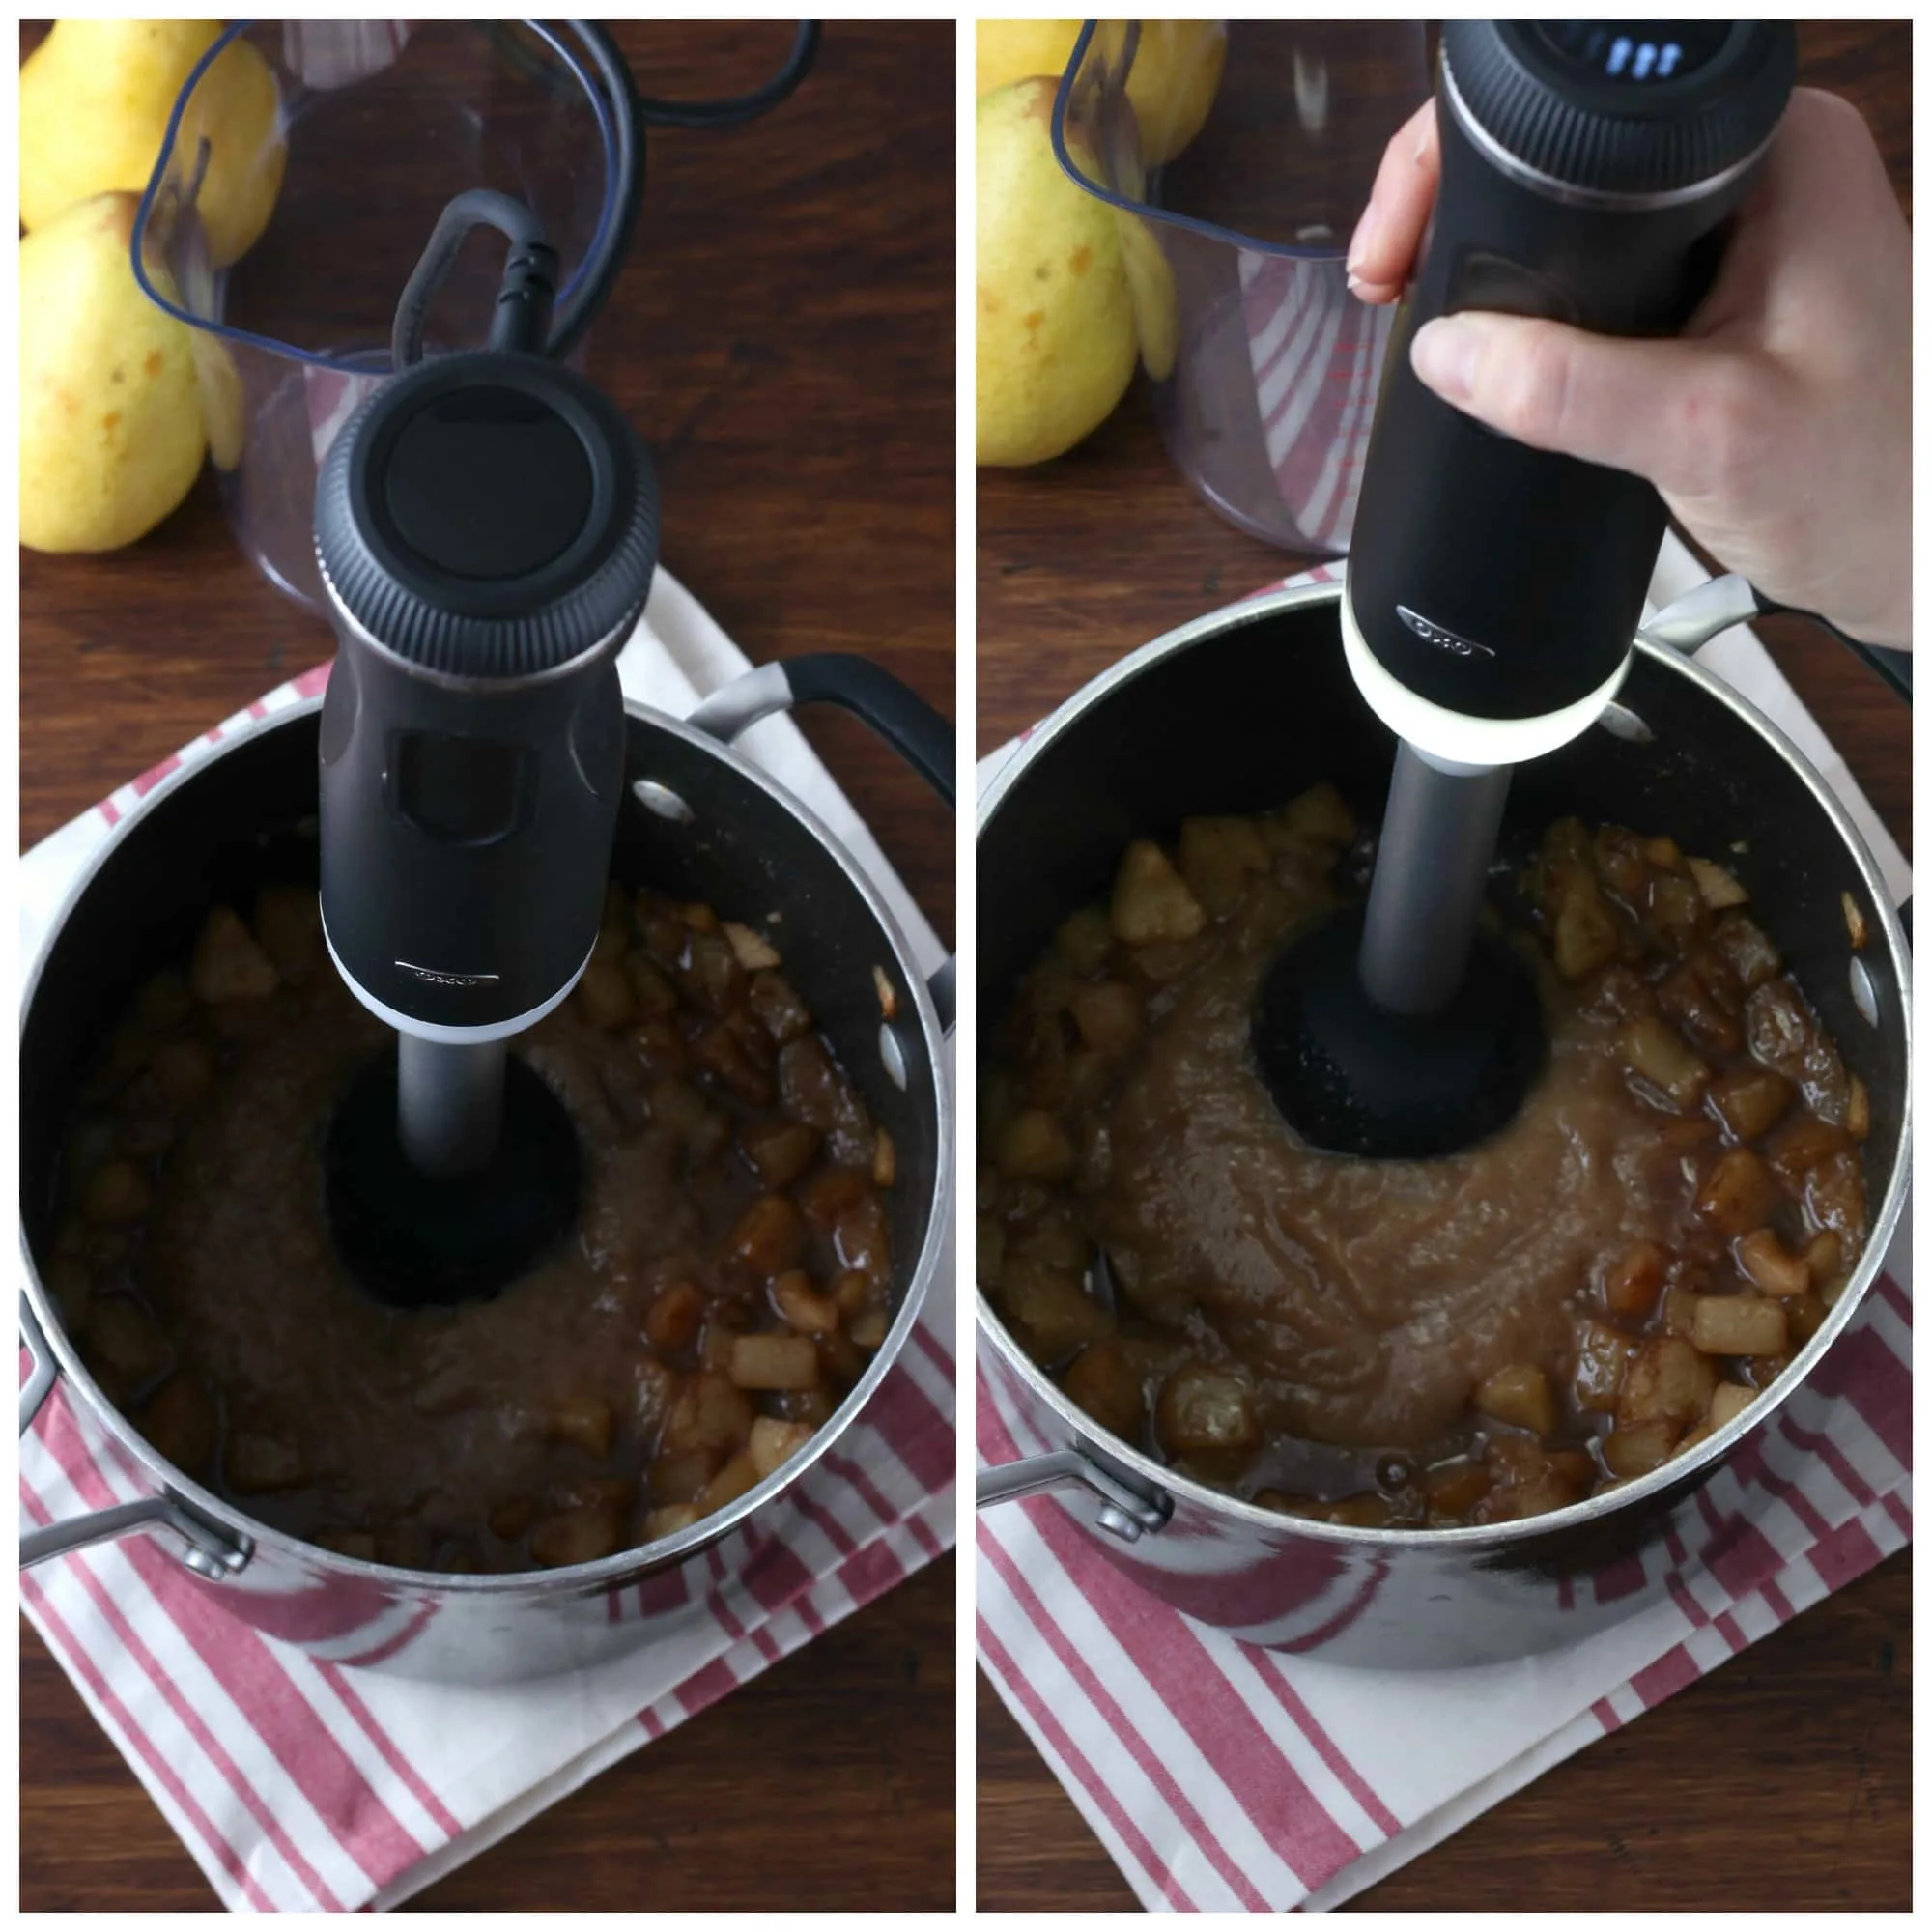 OXO Immersion Blender in use #OXOon